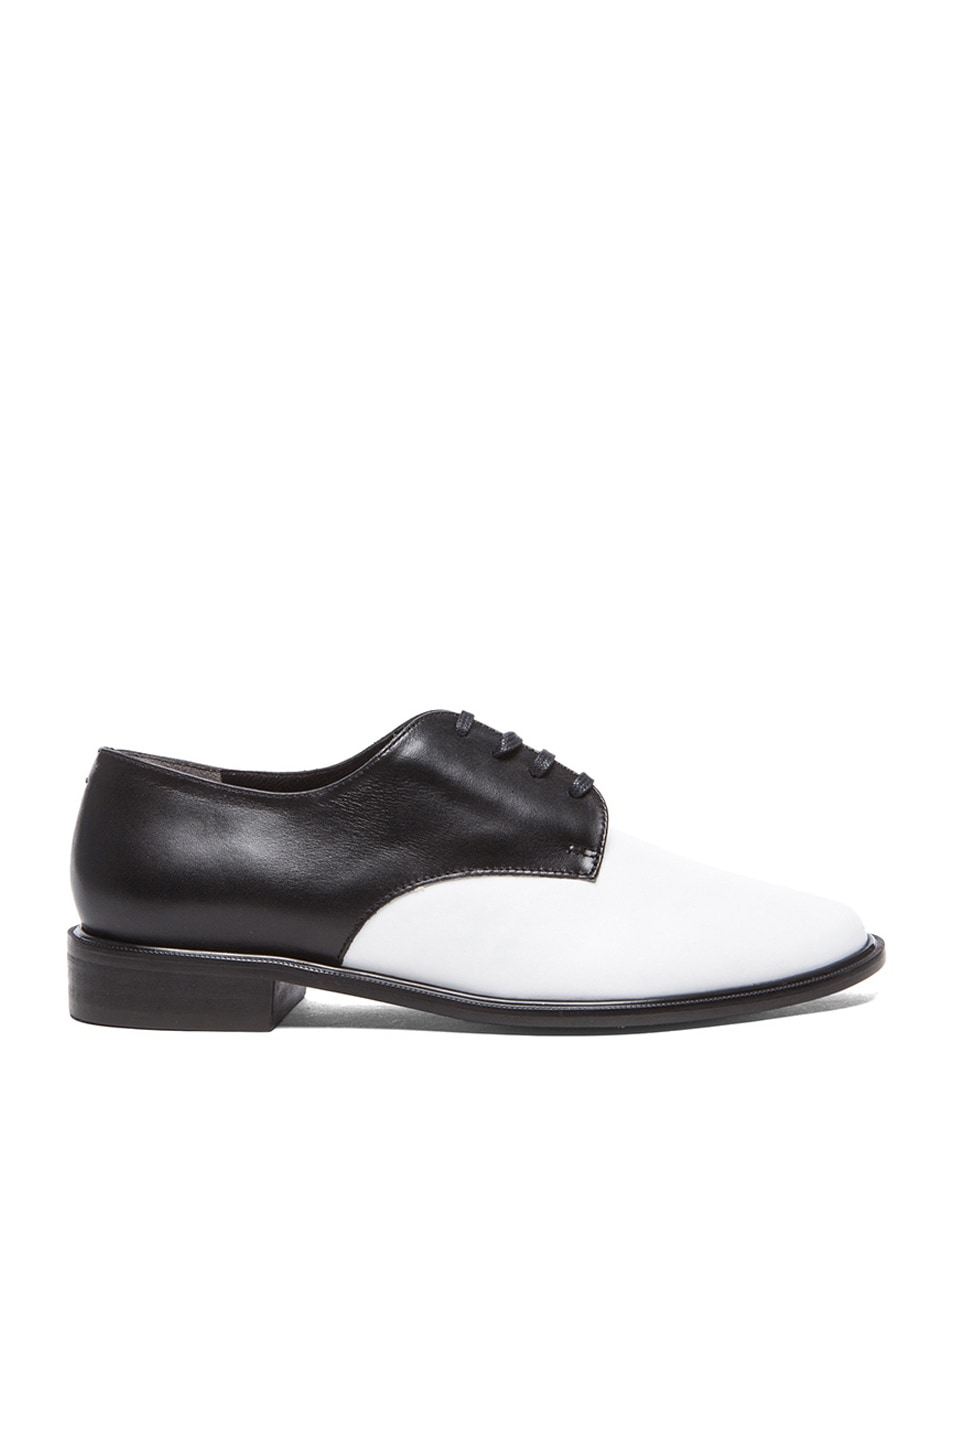 Image 1 of Robert Clergerie Jasi Lace Up Leather Oxfords in Black & White